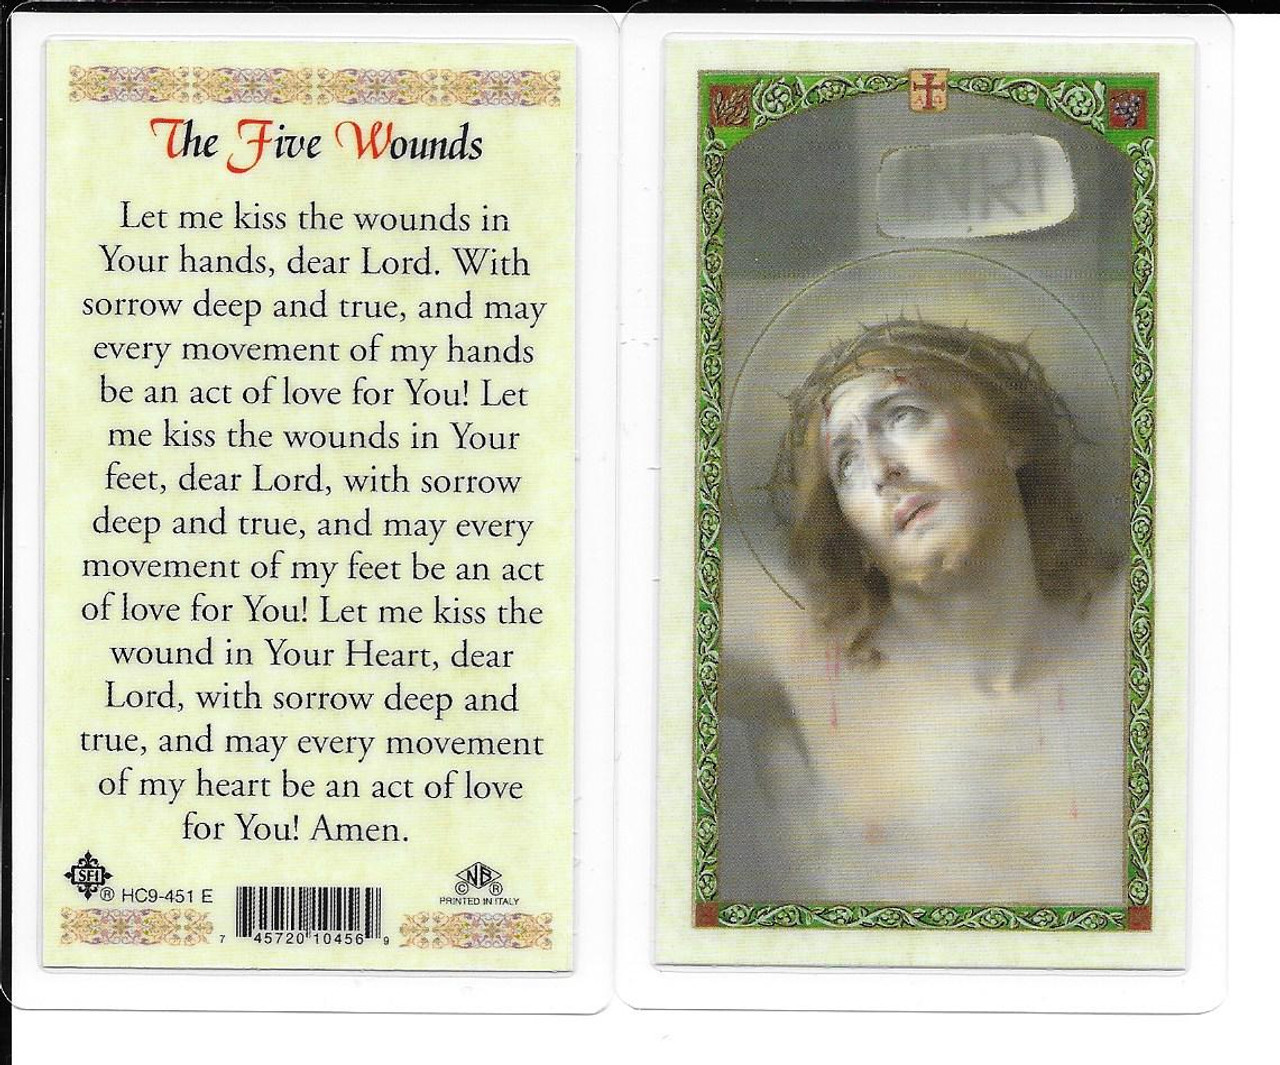 Laminated Prayer Card “The Five Wounds”.